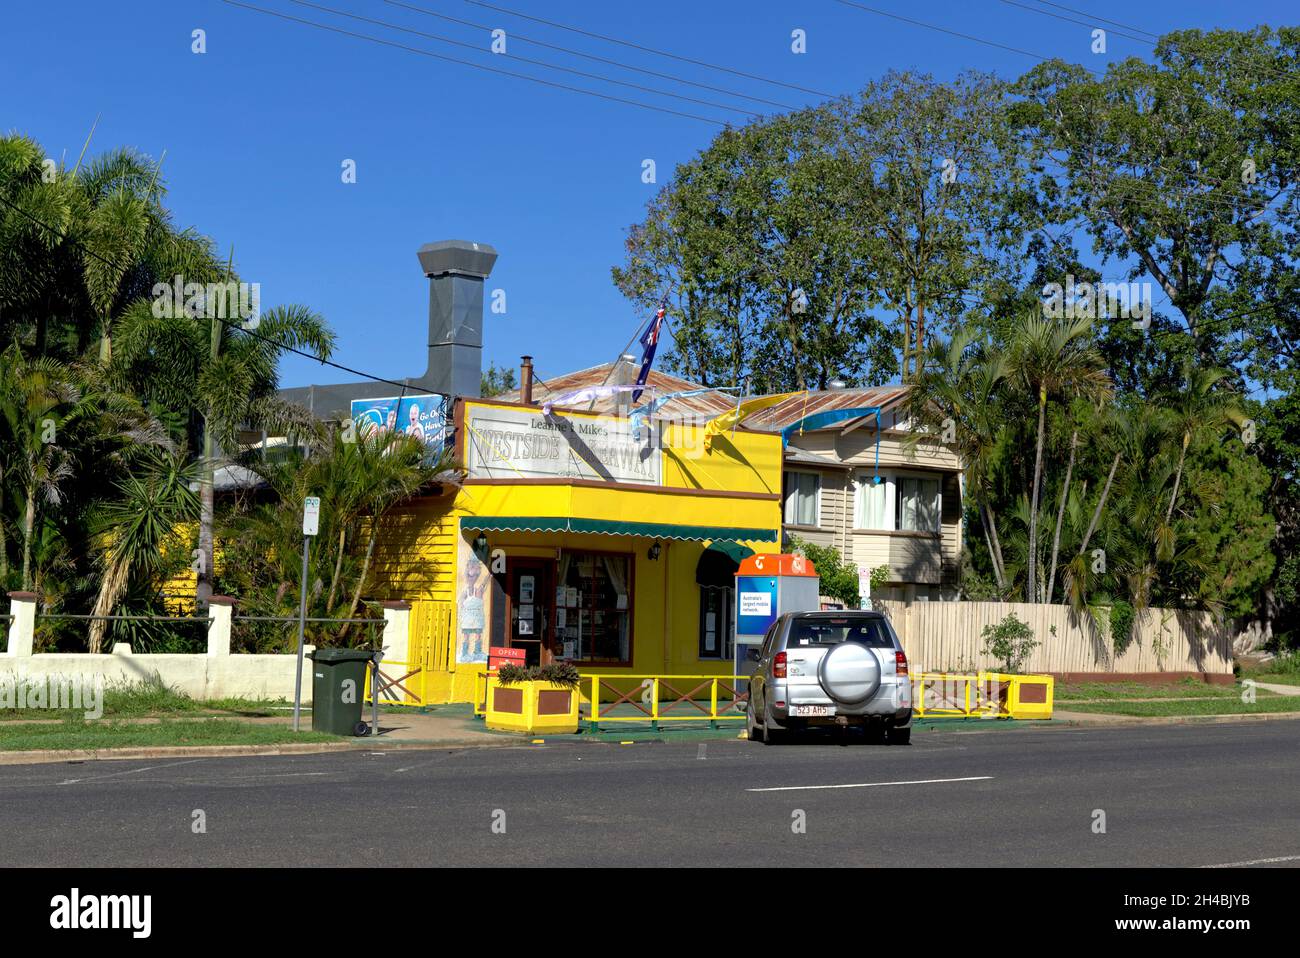 Leanne and Mikes takeaway shop forms a colourful part of the streetscape of Meson Street Gayndah Queensland Australia Stock Photo